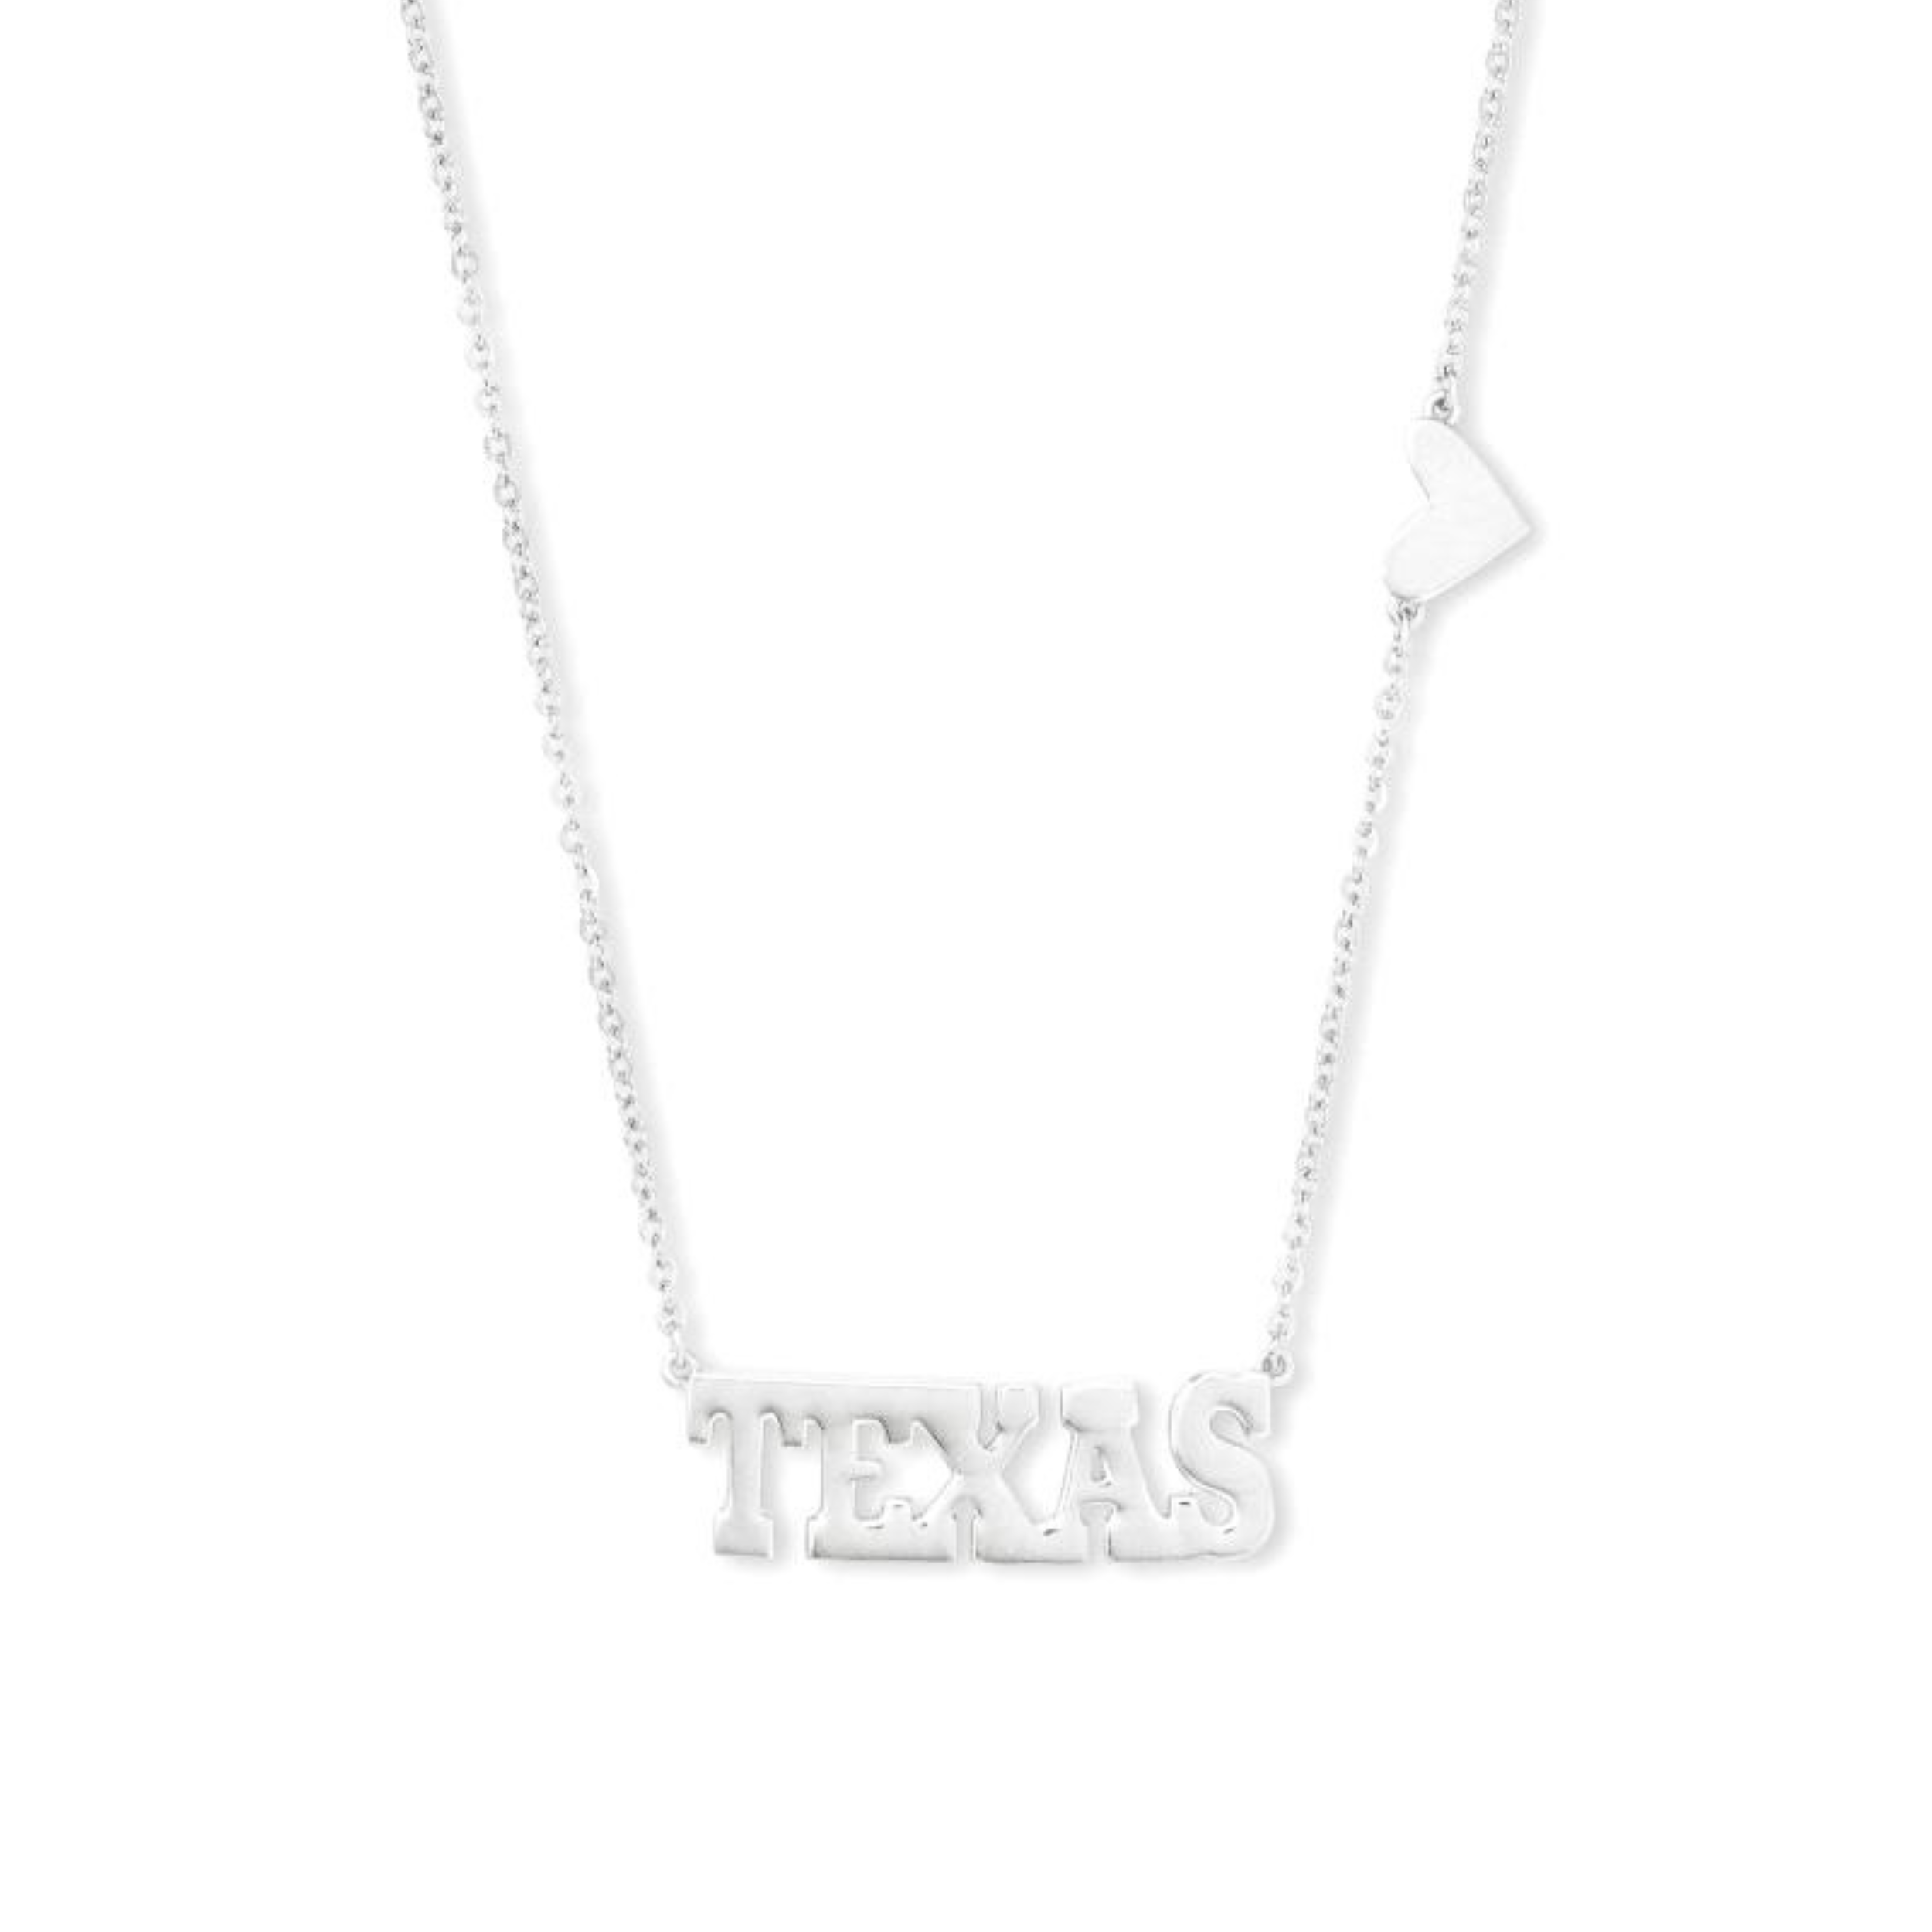 Kendra Scott | Texas Pendant Necklace in Sterling Silver - Giddy Up Glamour Boutique